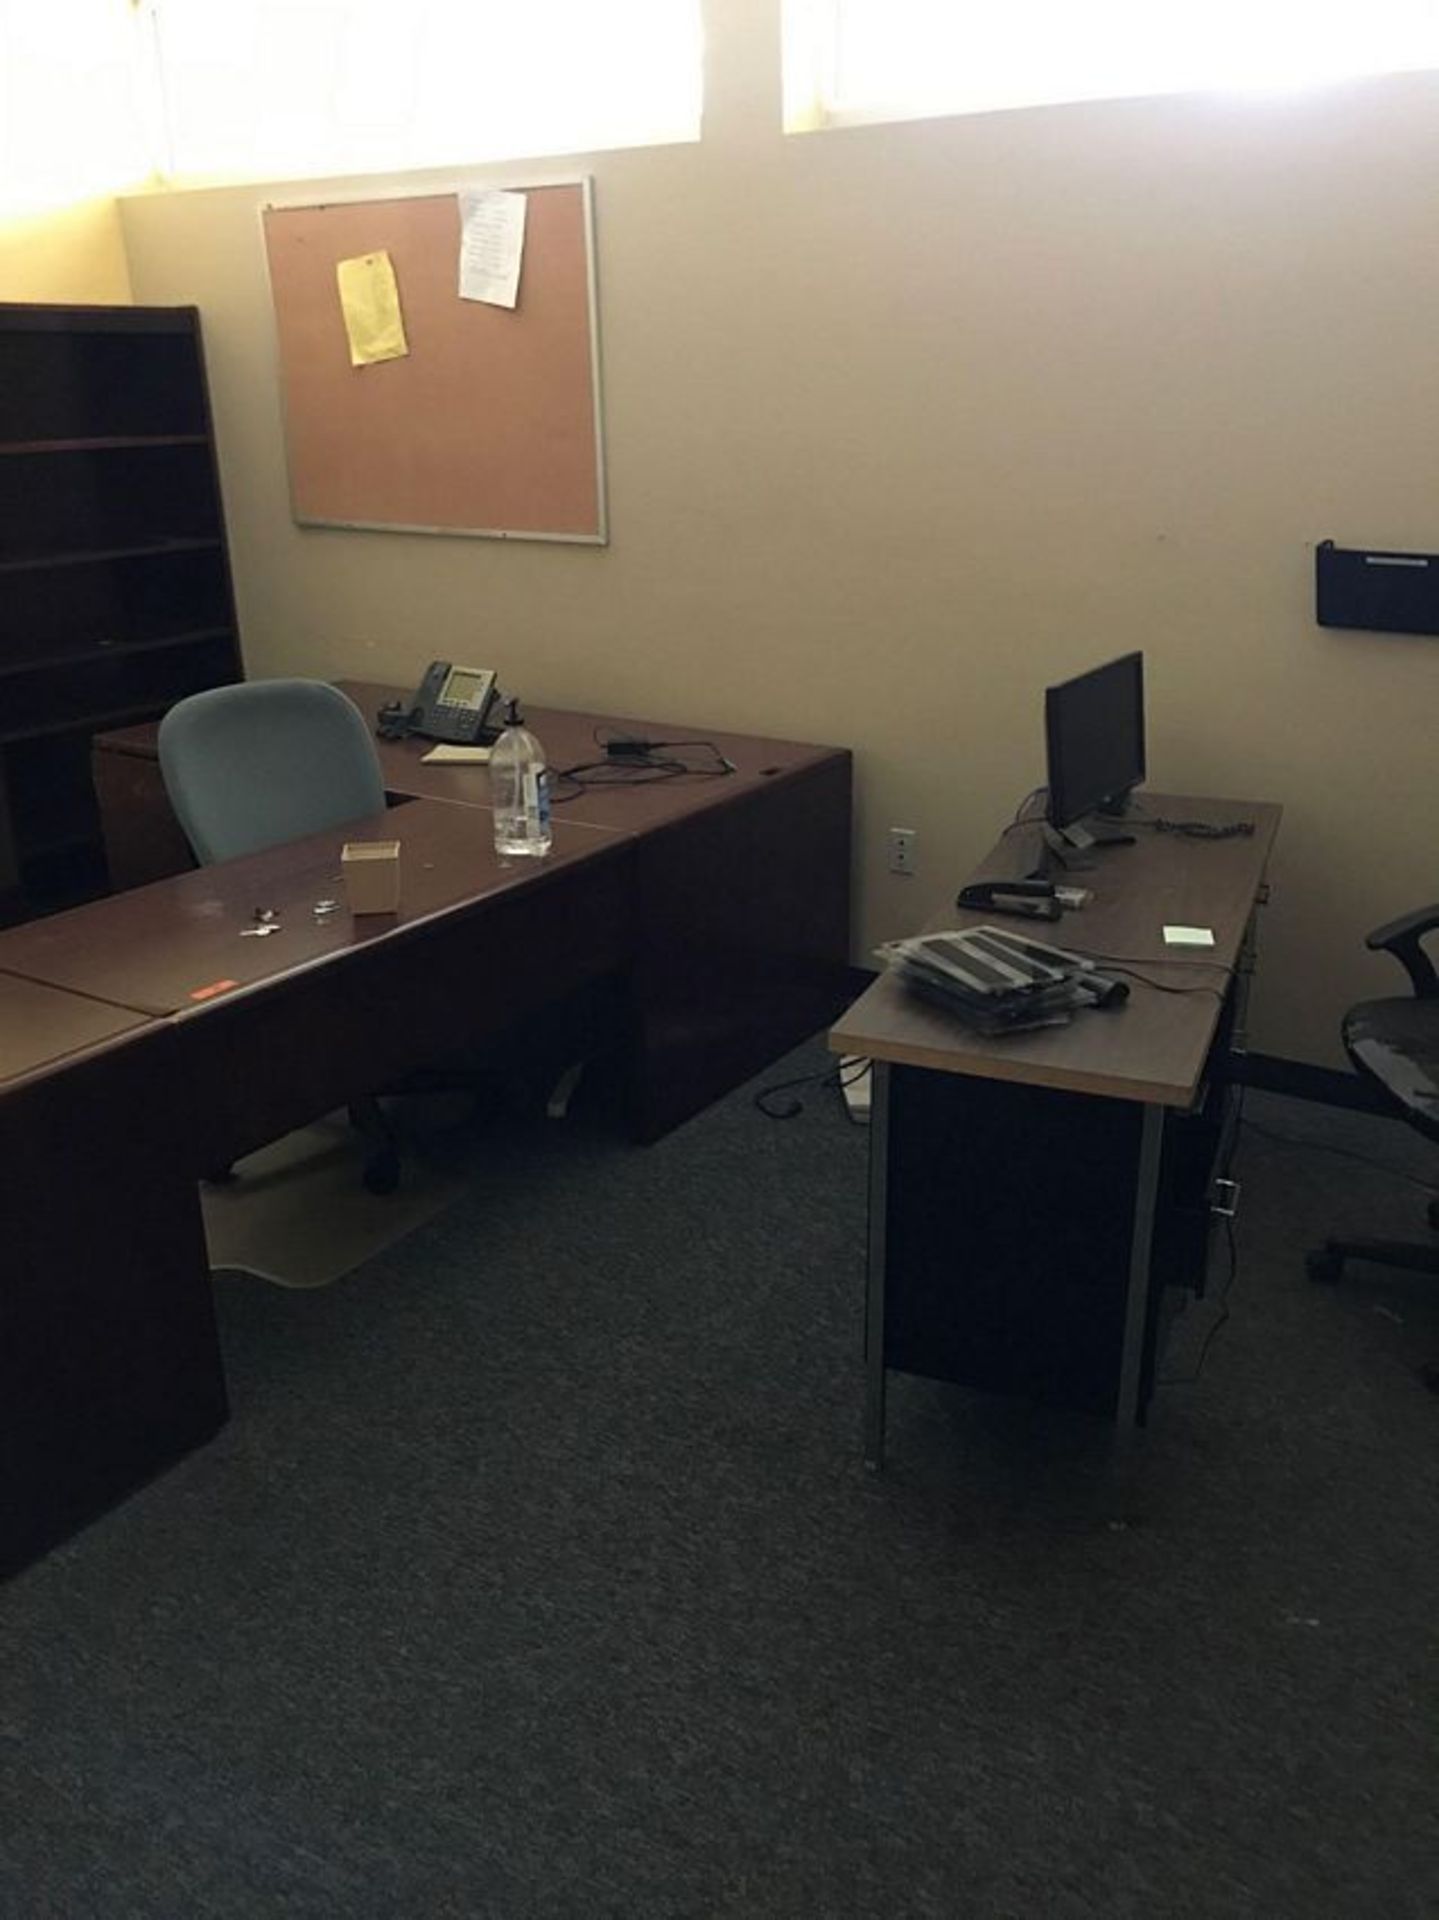 OFFICE TO INCLUDE (2) WOOD DESKS, (2) OFFICE CHAIRS, (2) CISCO PHONES AND (1) MONITOR